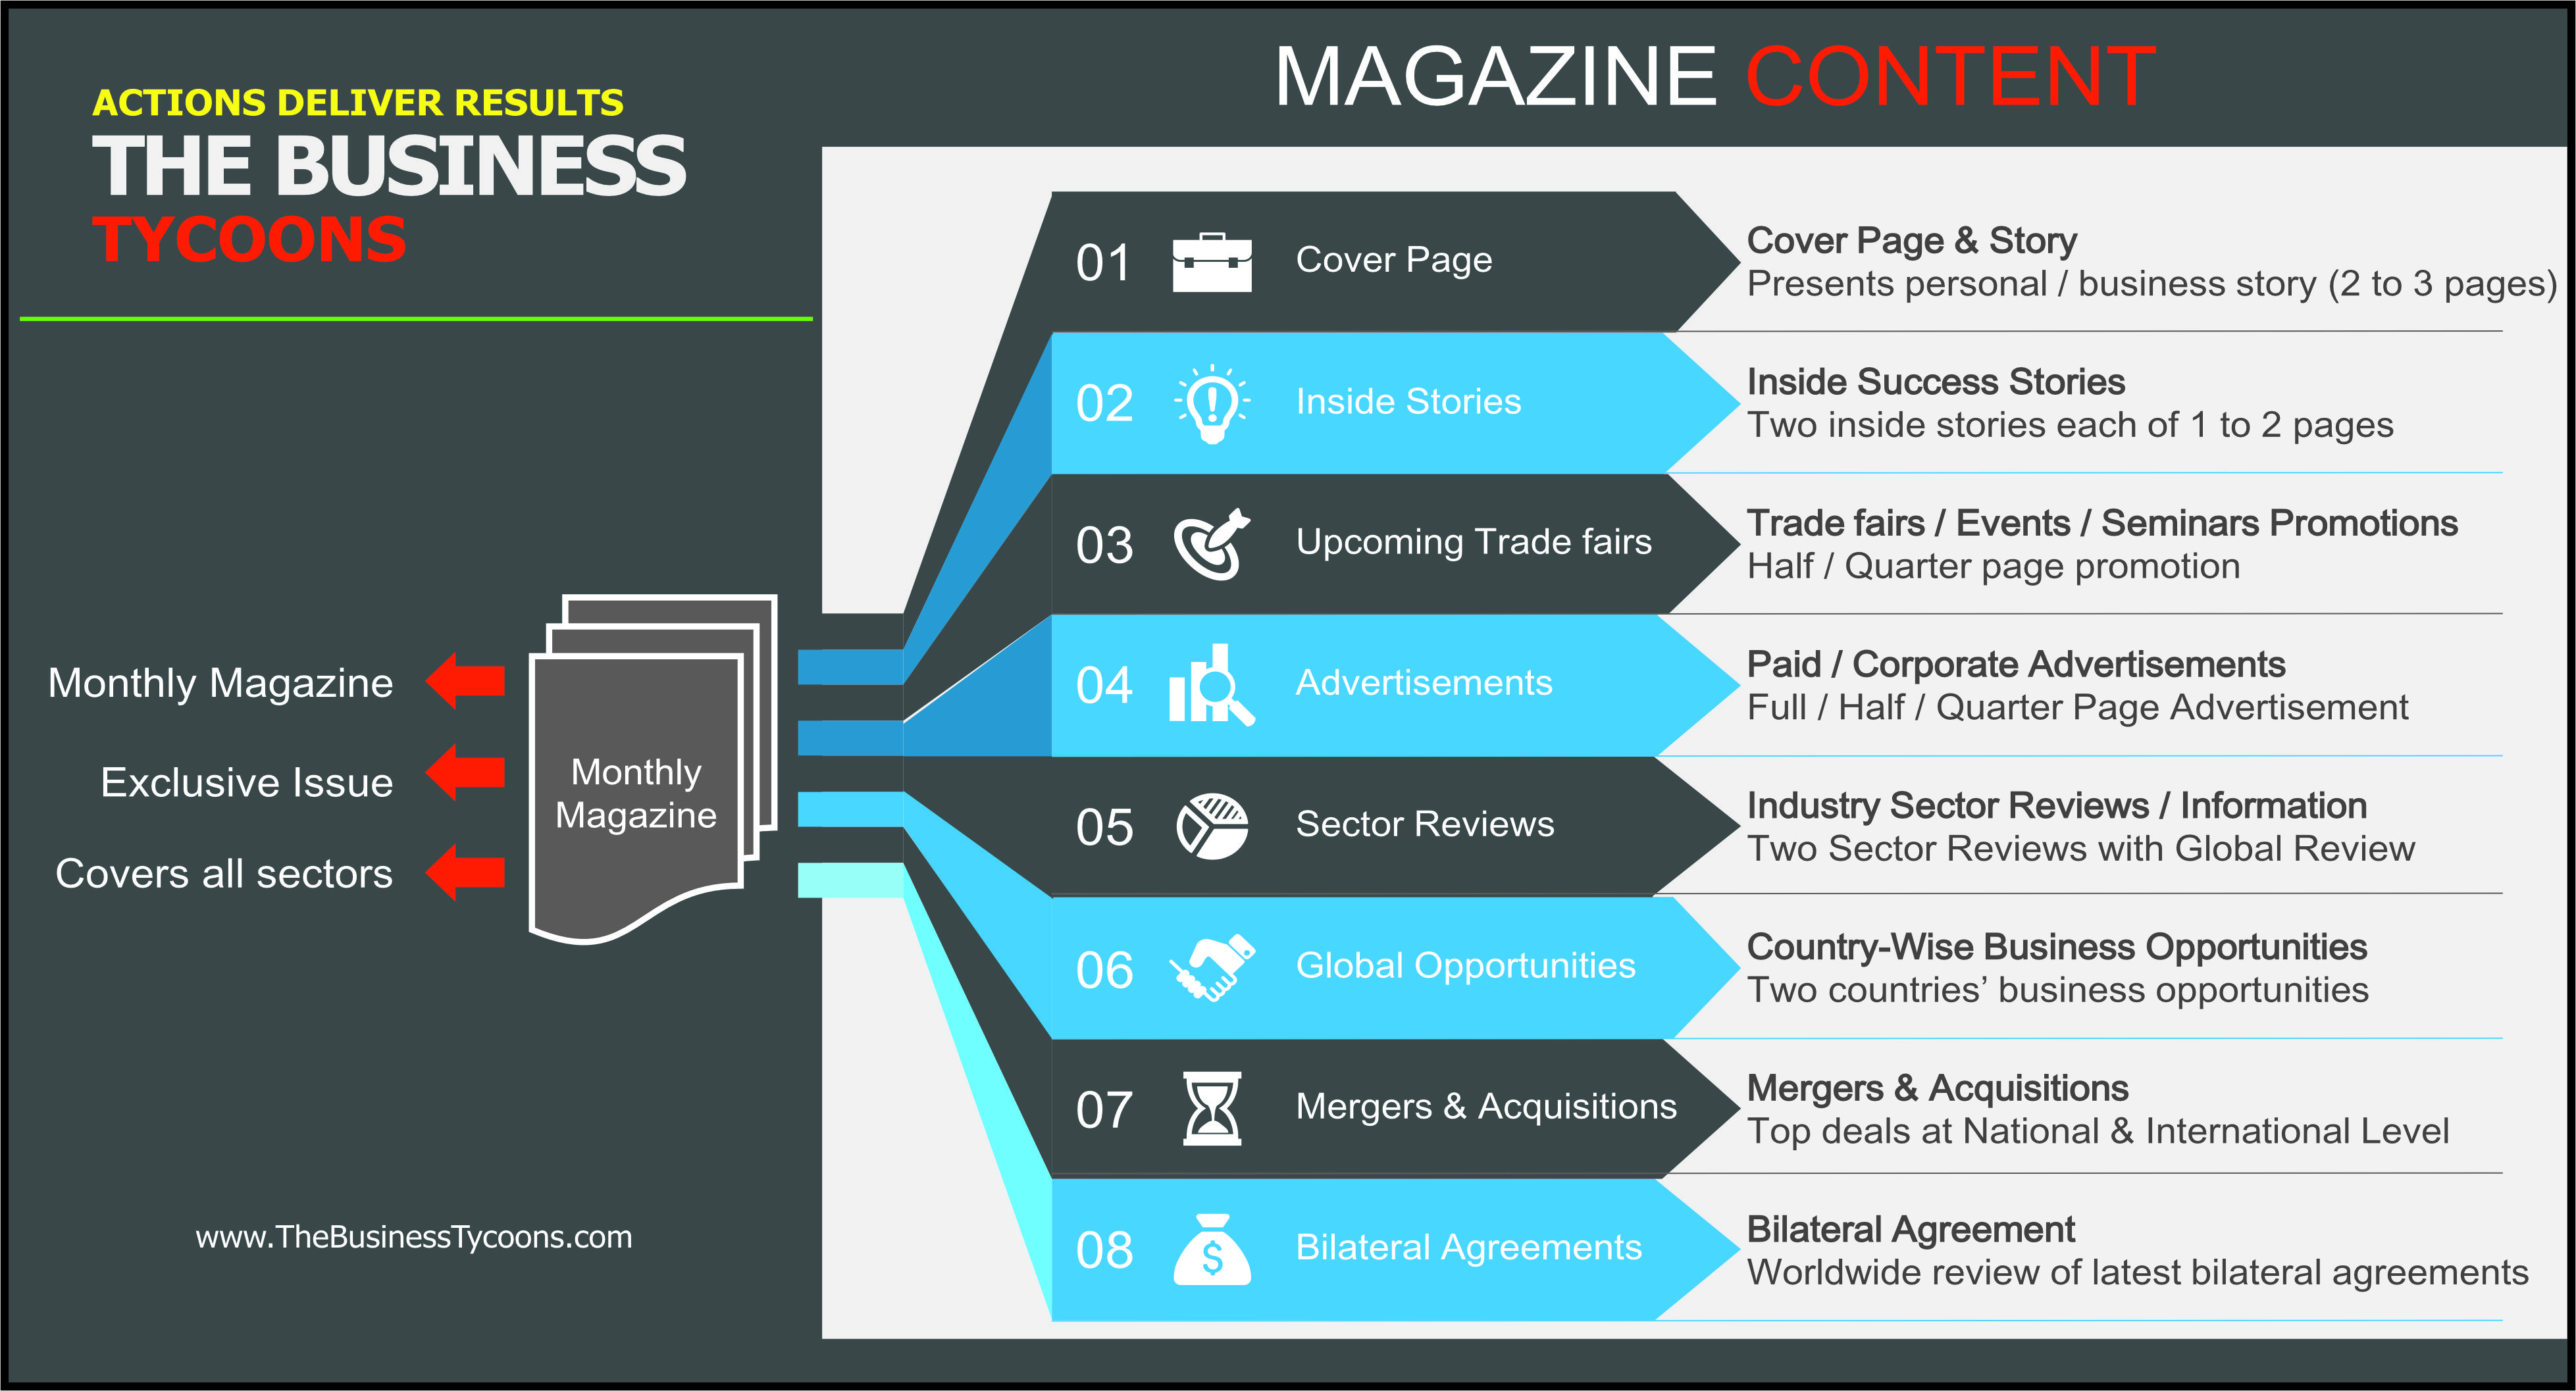 The Business Tycoons - Magazine content